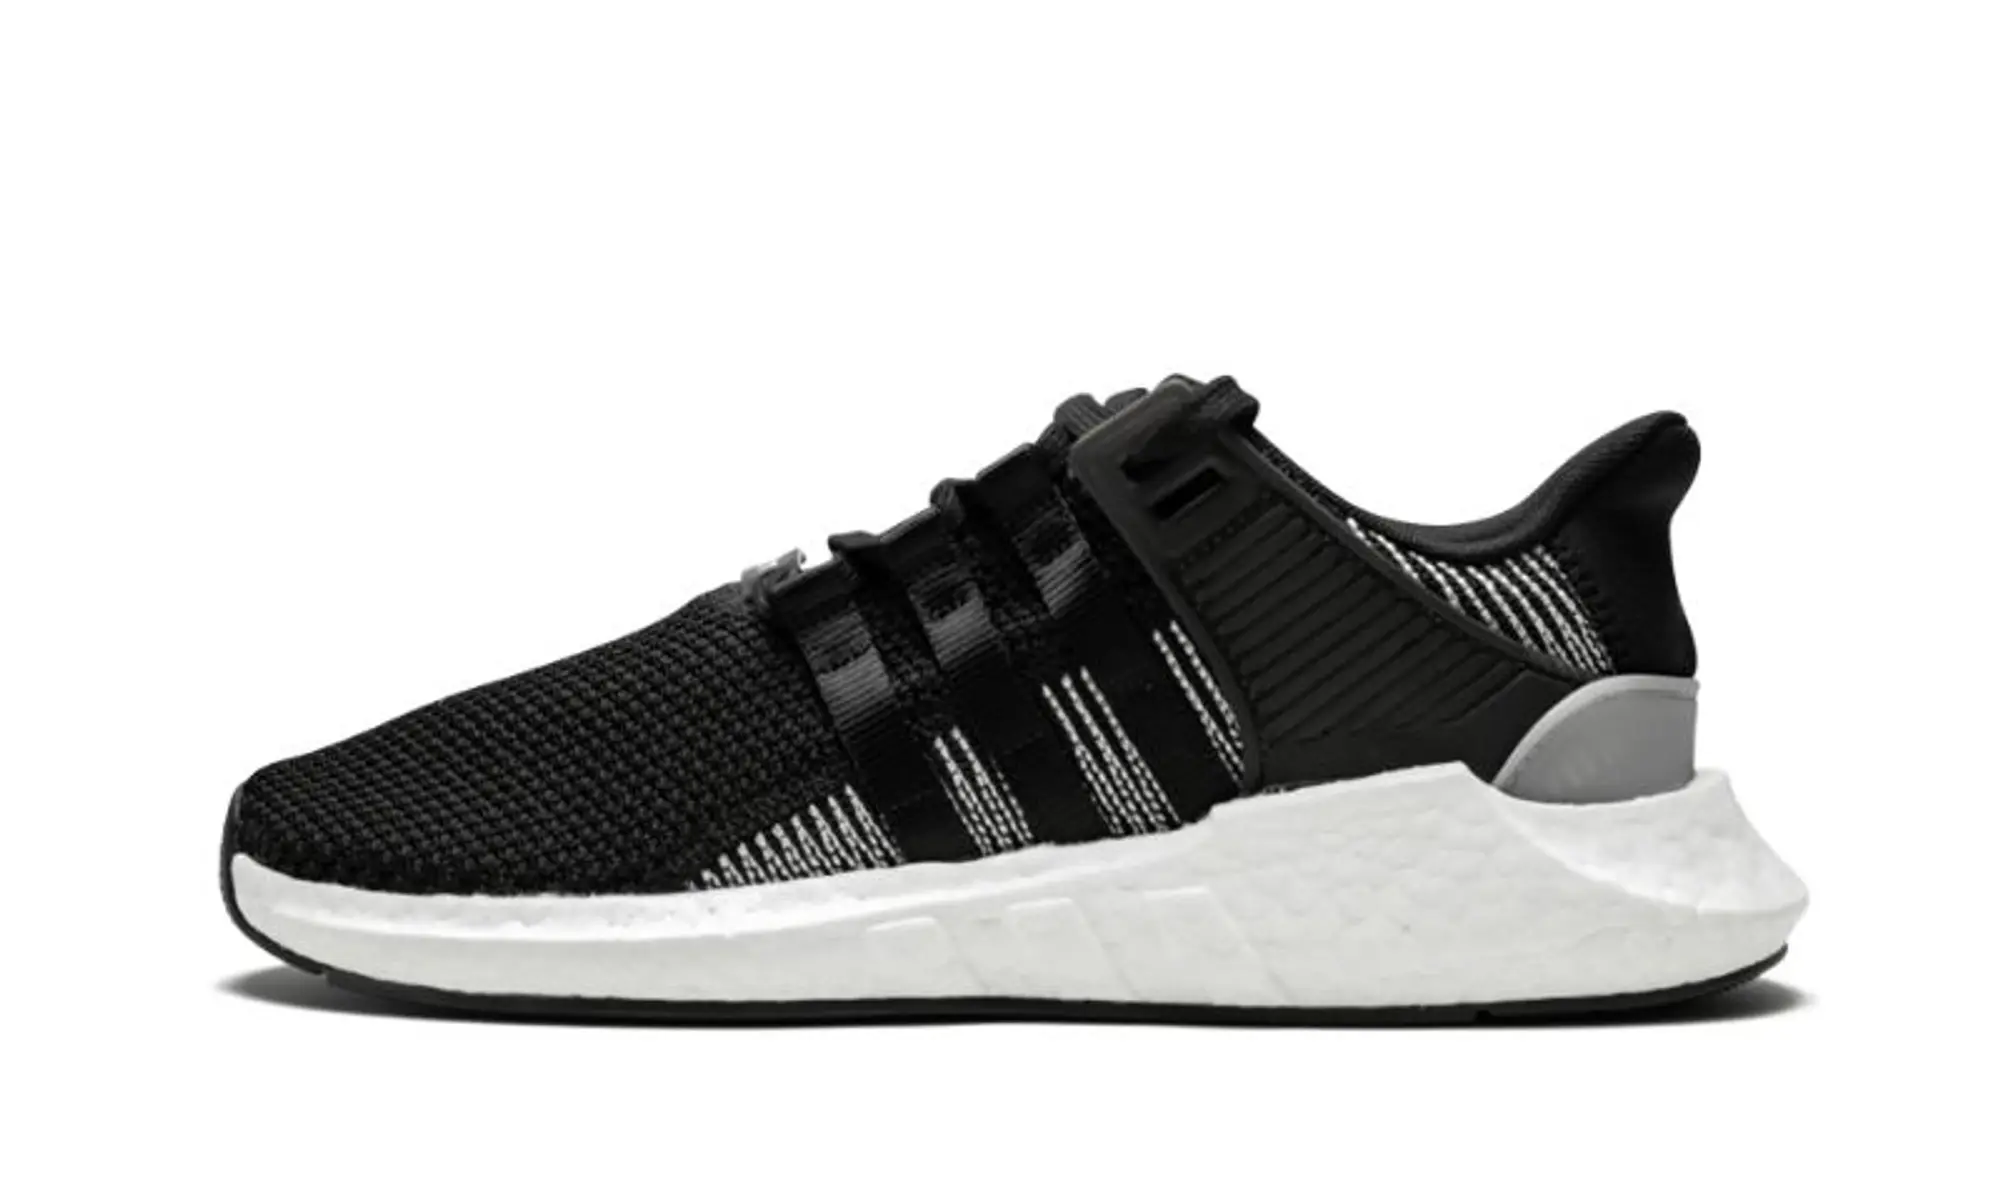 adidas EQT Support 93 / 17 Shoes